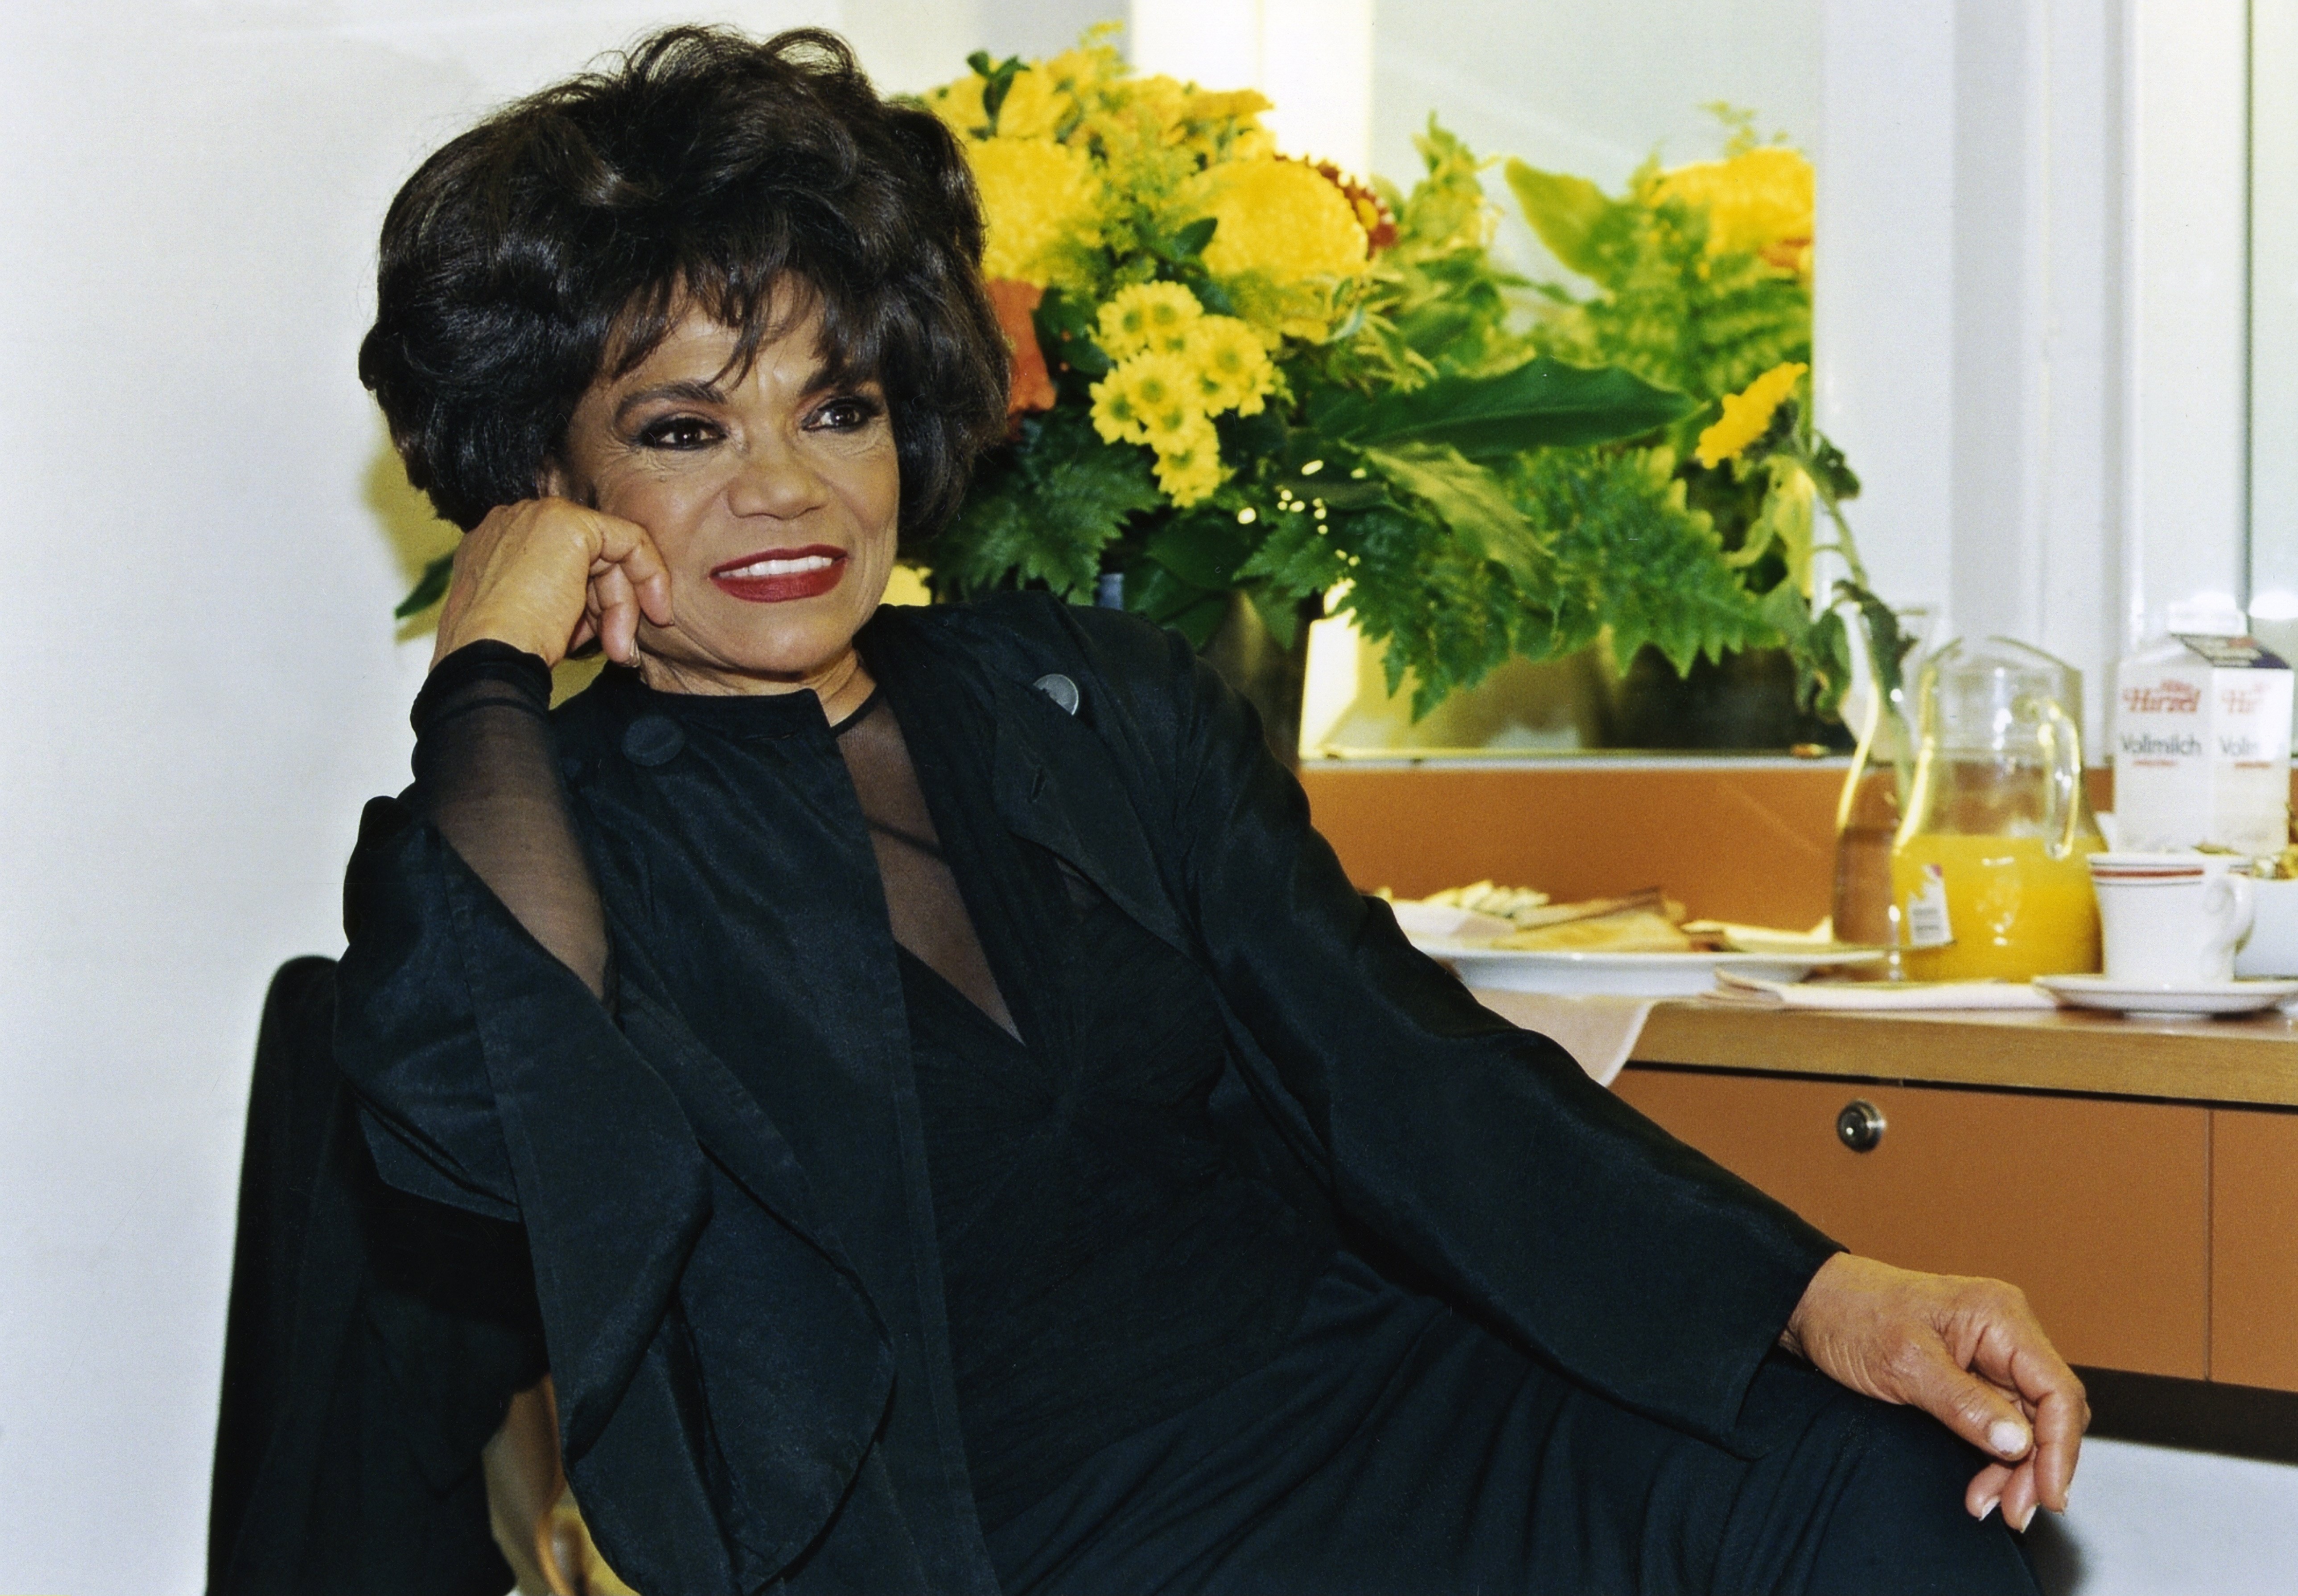 A photograph of "Santa Baby" singer Eartha Kitt looking away while smiling | Photo: Getty Images